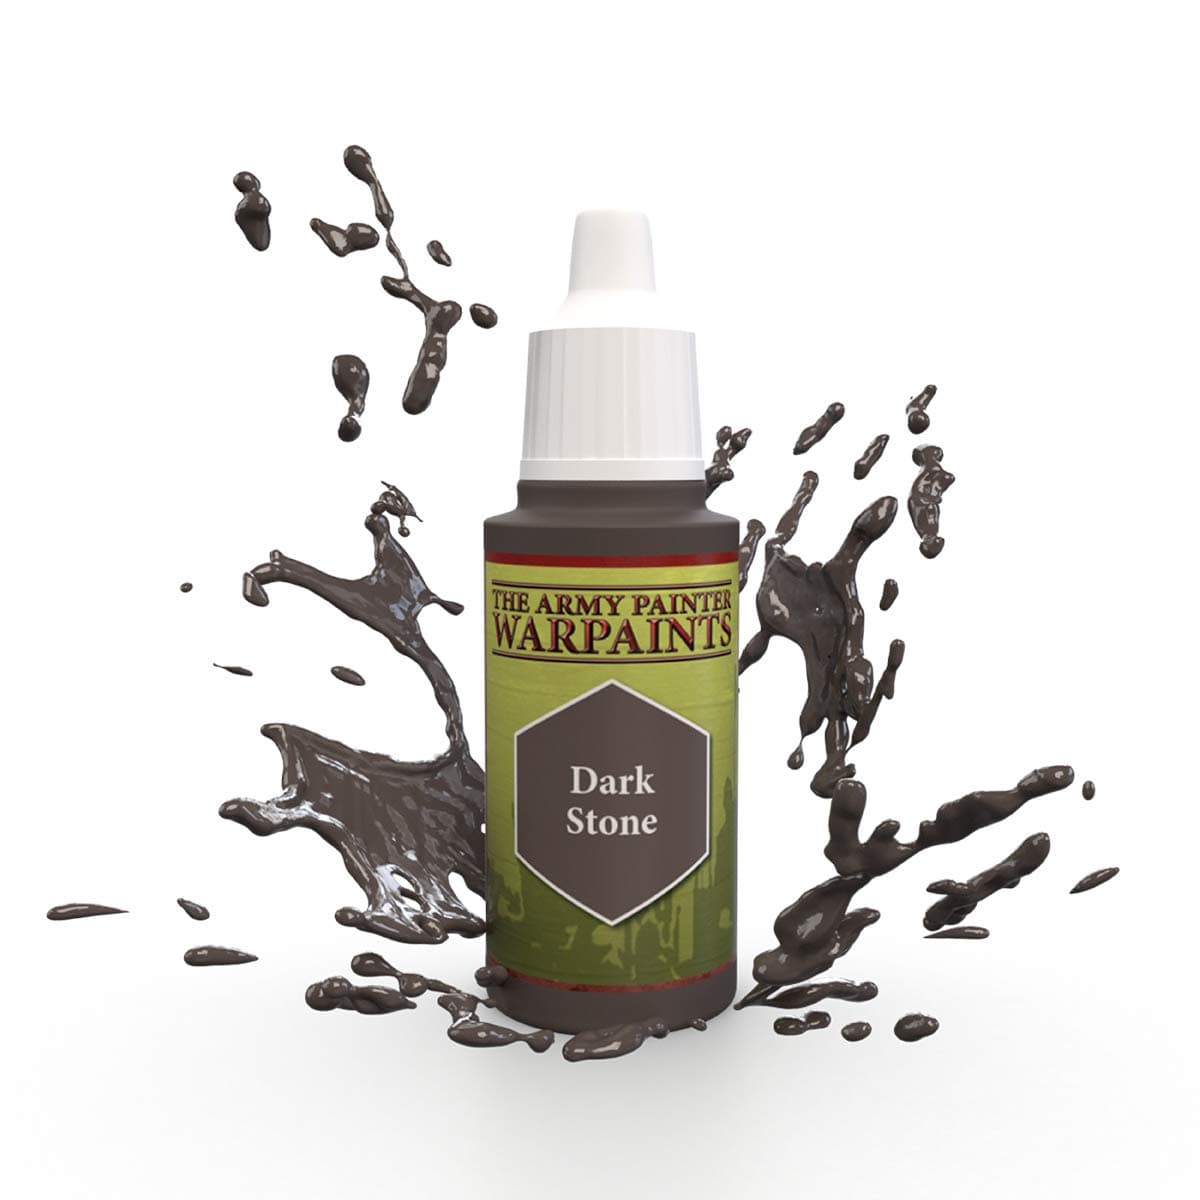 The Army Painter Accessories The Army Painter Warpaints: Dark Stone 18ml